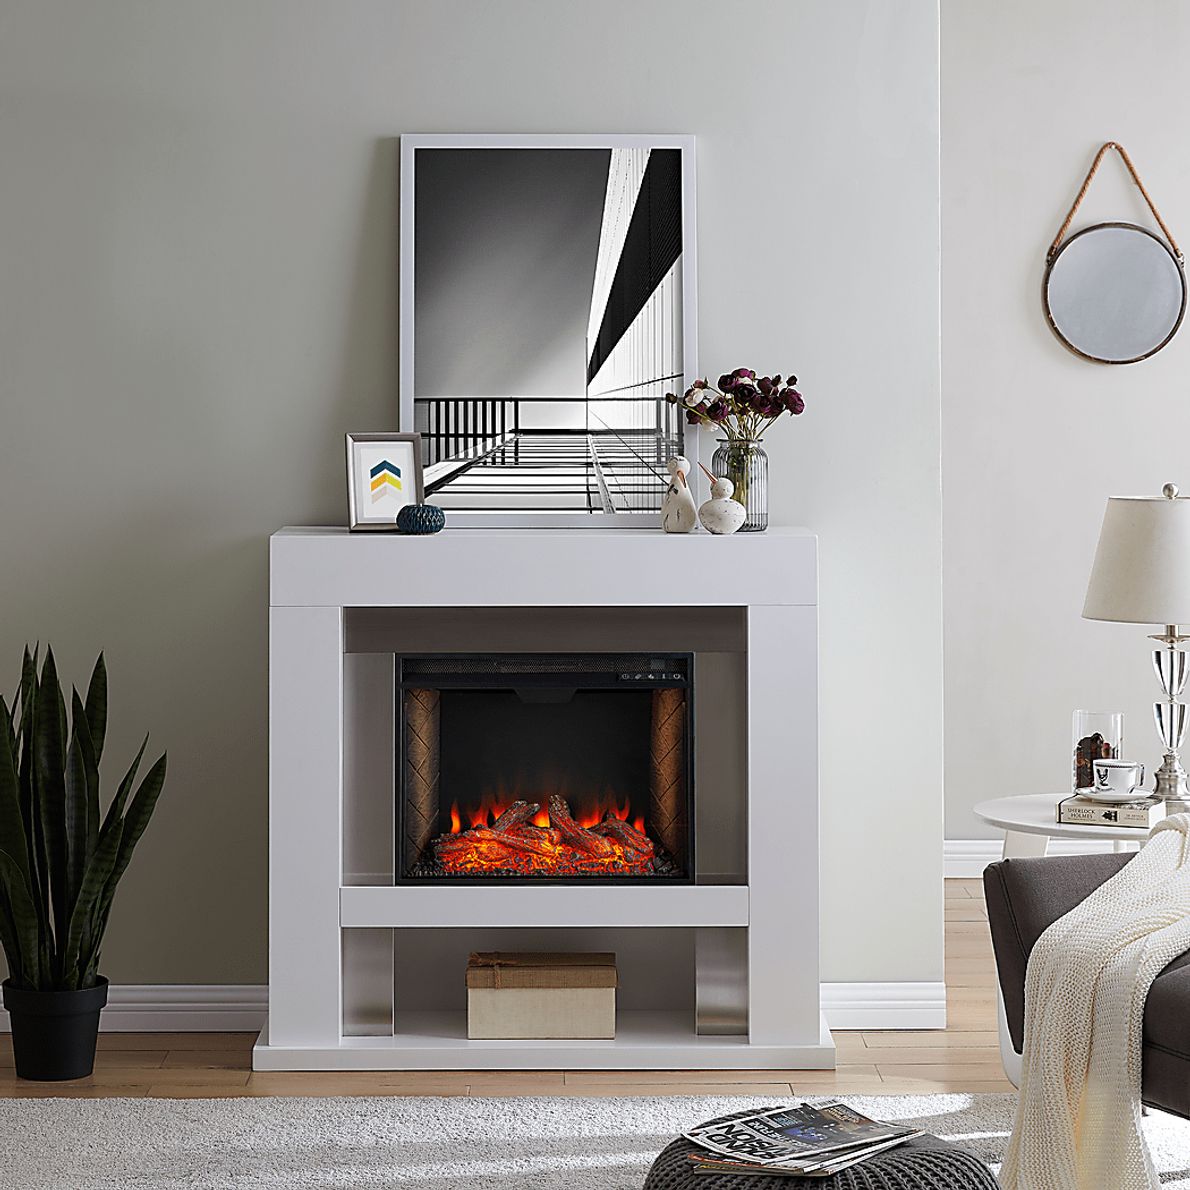 Linkmeadow III White 44 in. Console With Smart Electric Fireplace